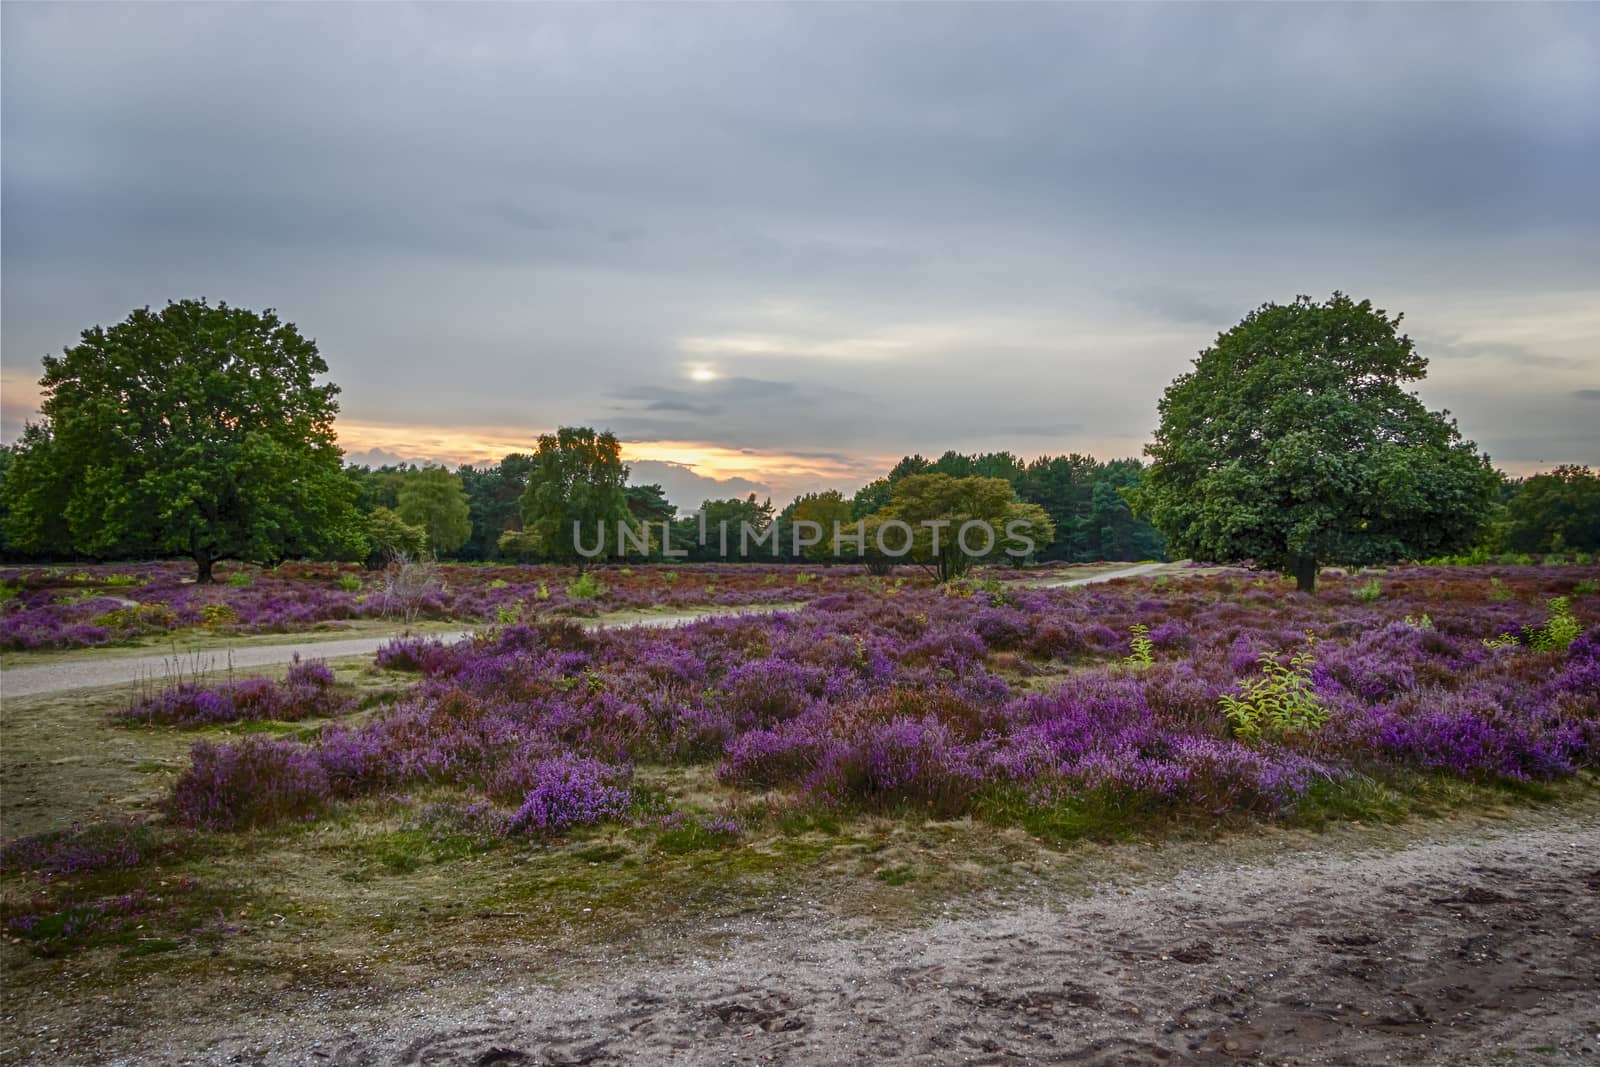 sunset over heather fields, the Netherlands by Tetyana